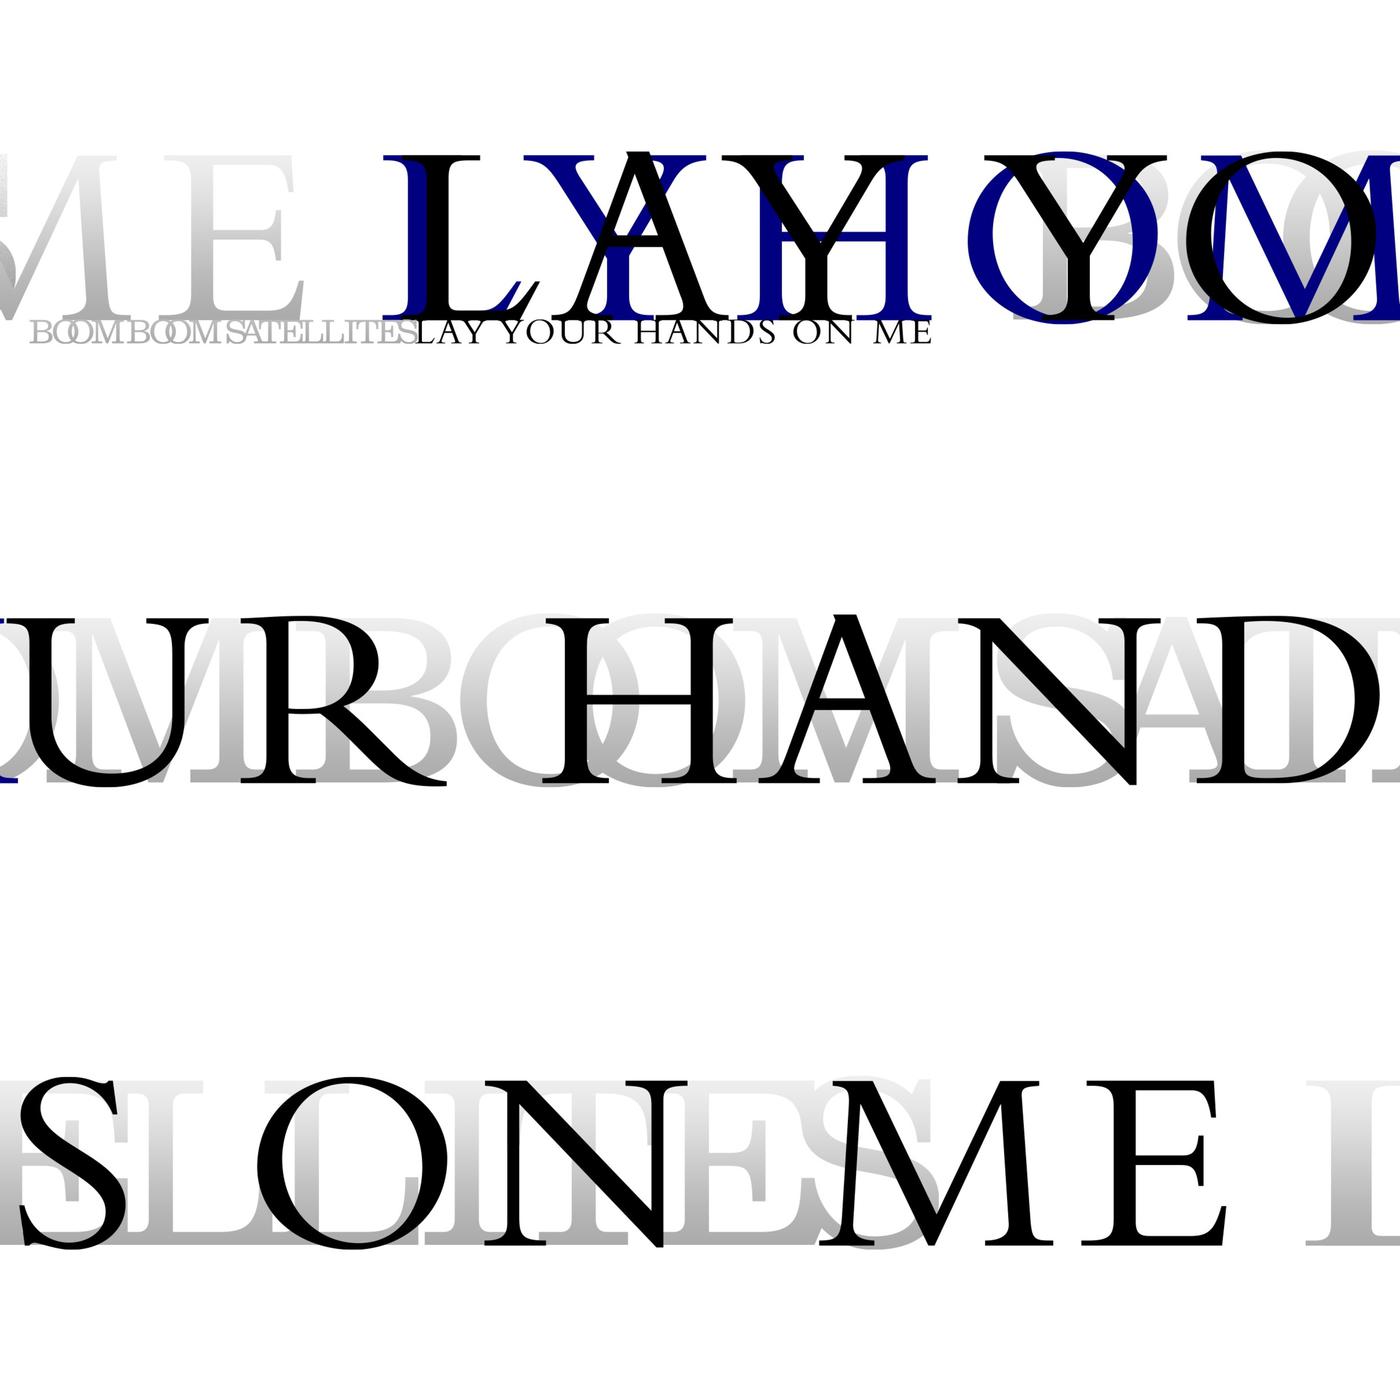 BOOM BOOM SATELLITES - Lay Your Hands on Me